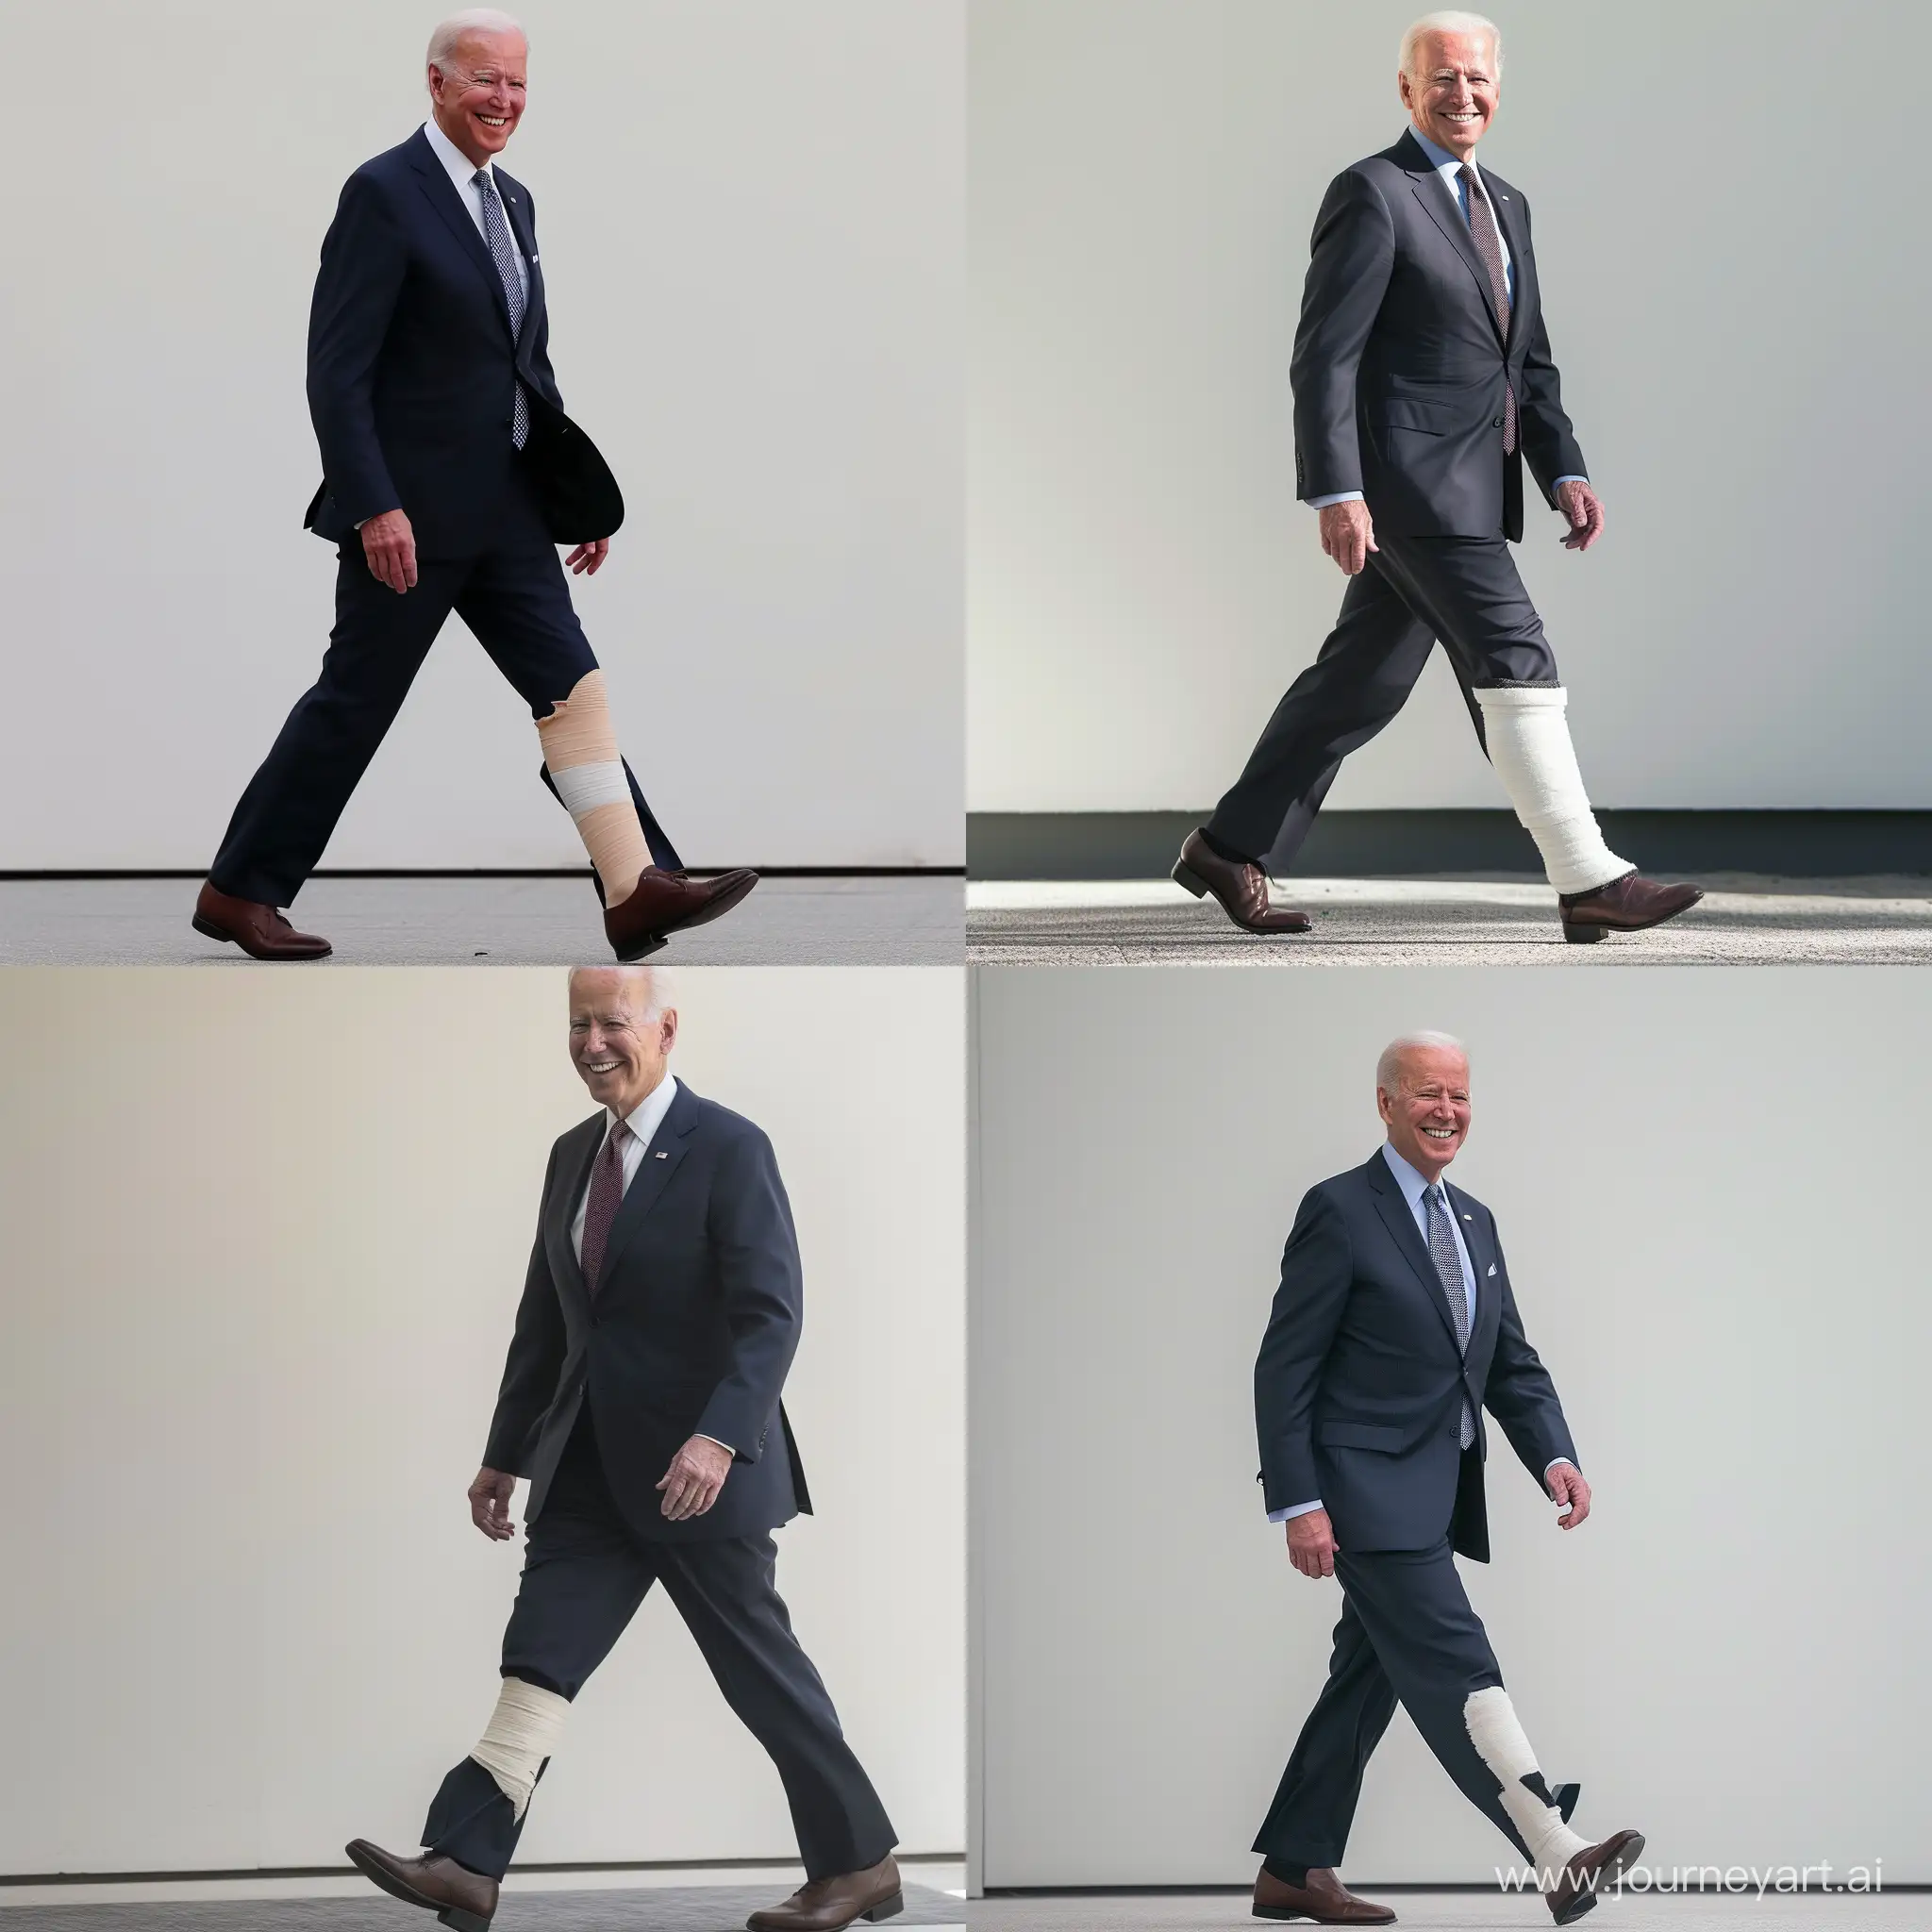 Joe-Biden-Smiling-While-Walking-with-Leg-Cast-in-Suit-and-Tie